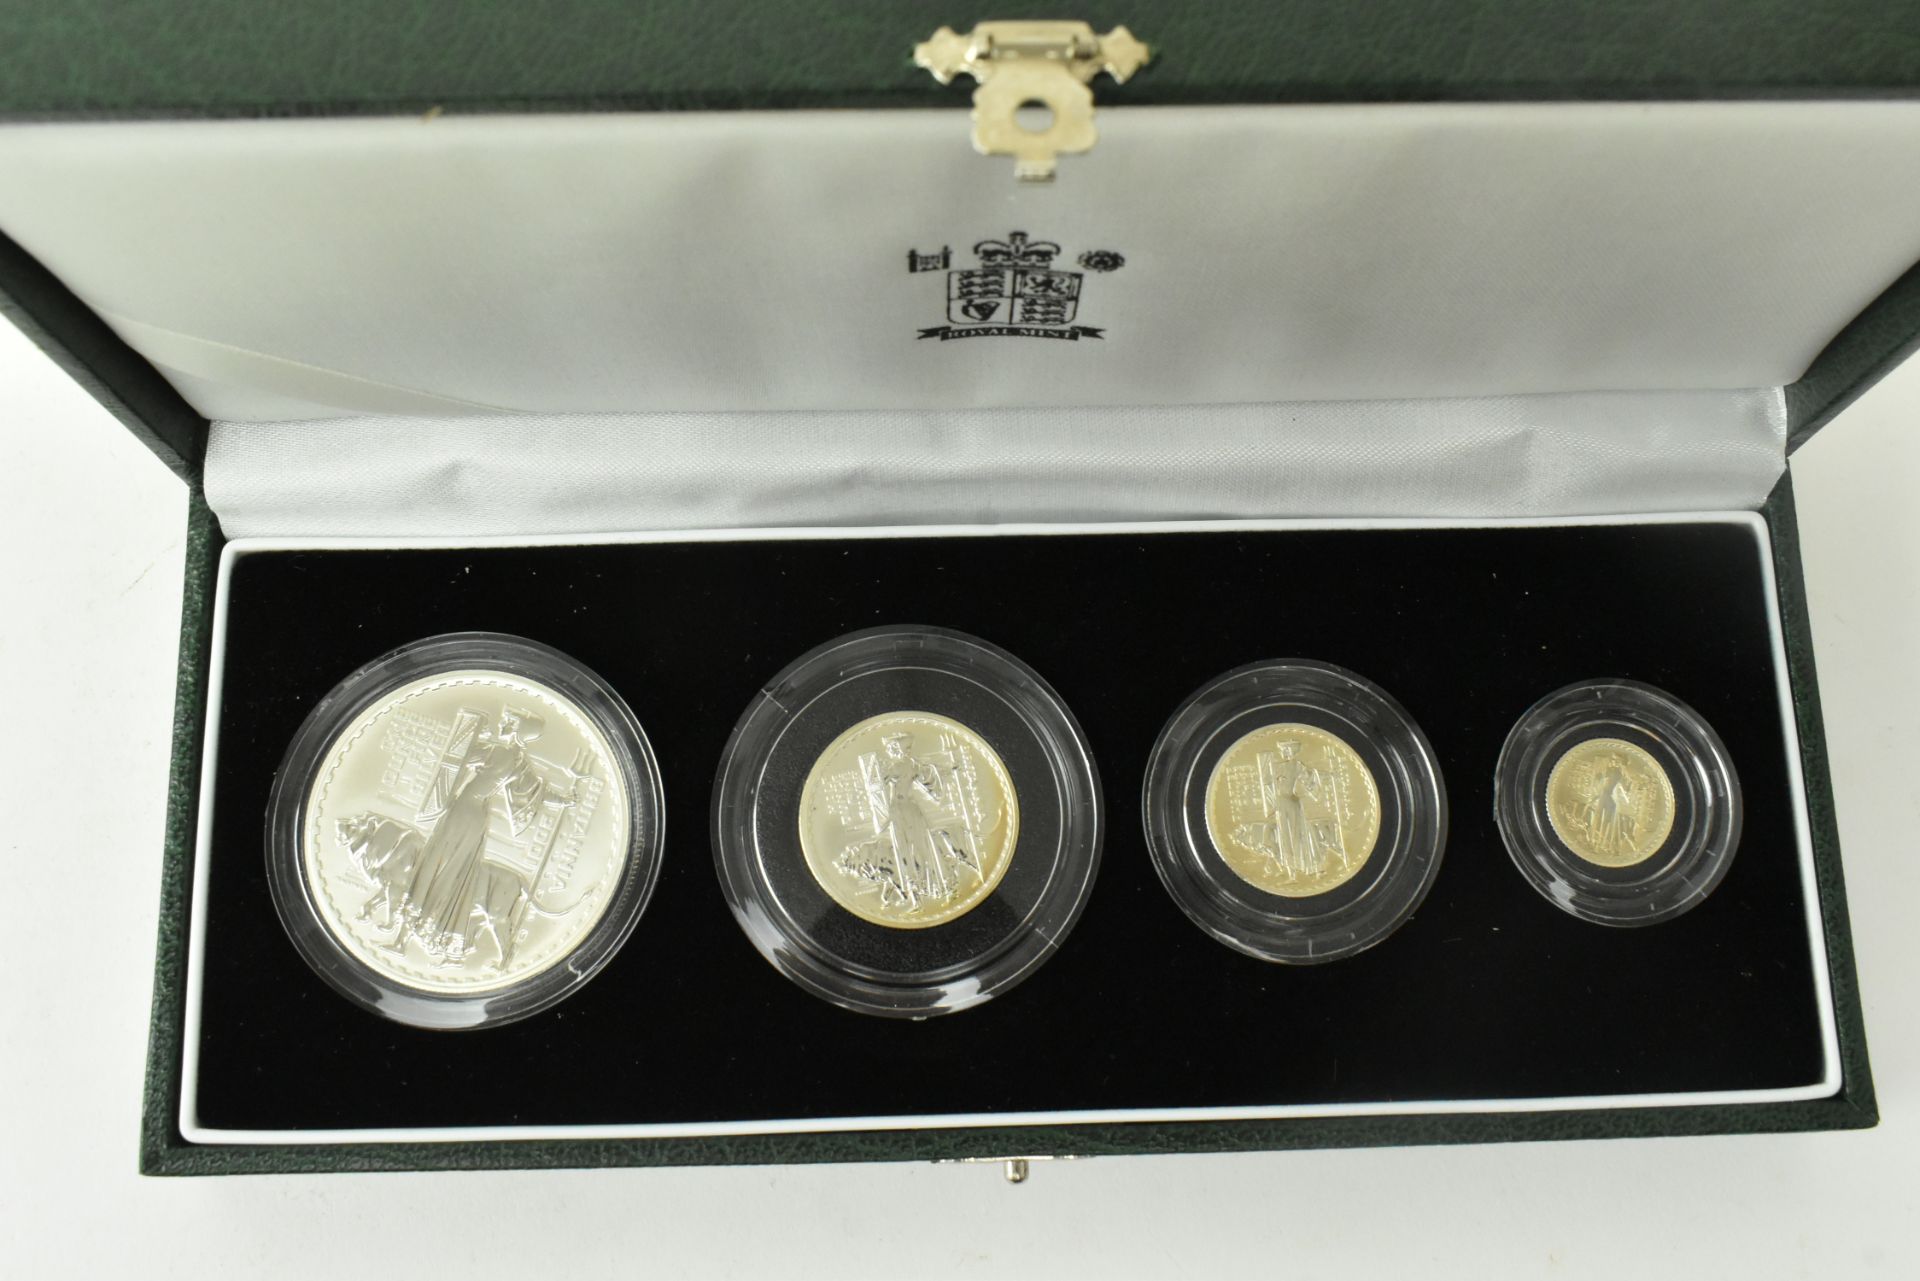 TWO SILVER PROOF BRITANNIA COIN COLLECTIONS, 1997 & 2001 - Image 3 of 3